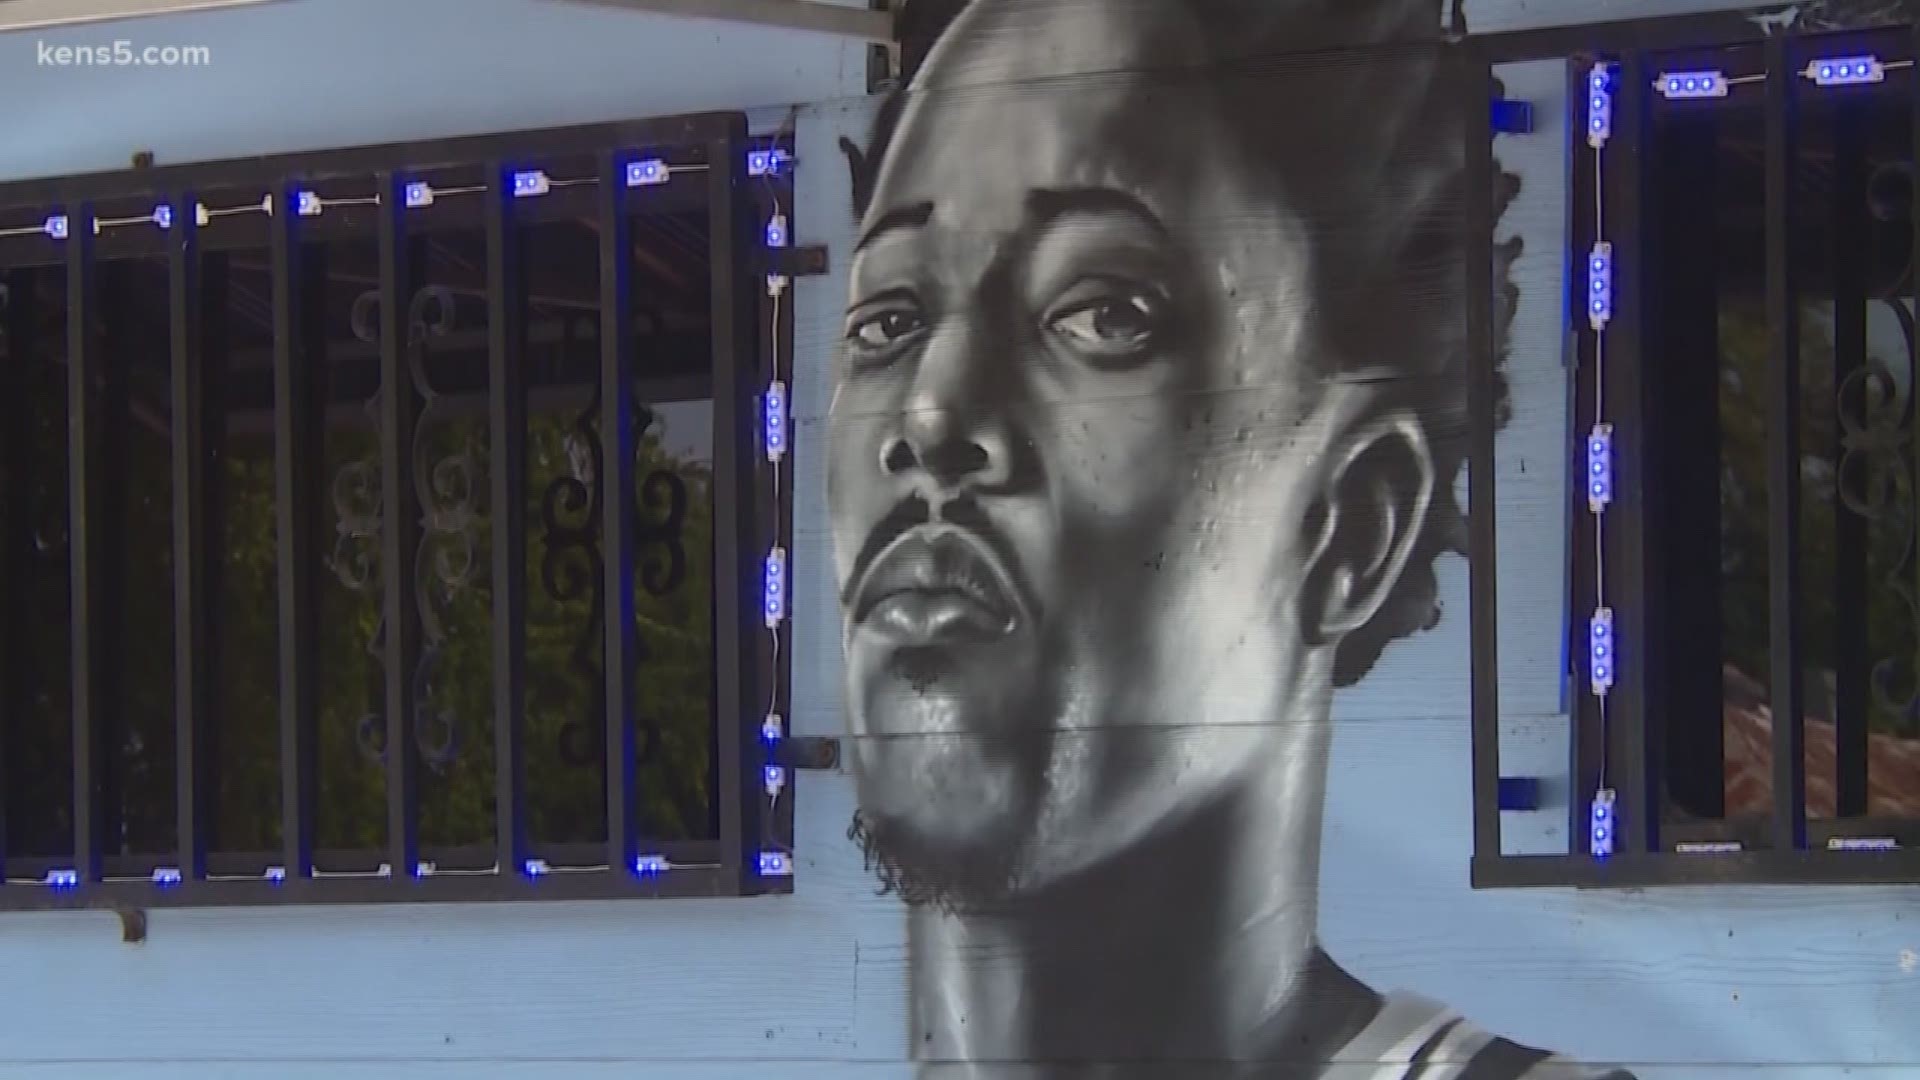 Before DeMar DeRozan suits up in a Spurs game or even a Spurs practice, he's already sporting the Silver and Black on a famous south-side mural.